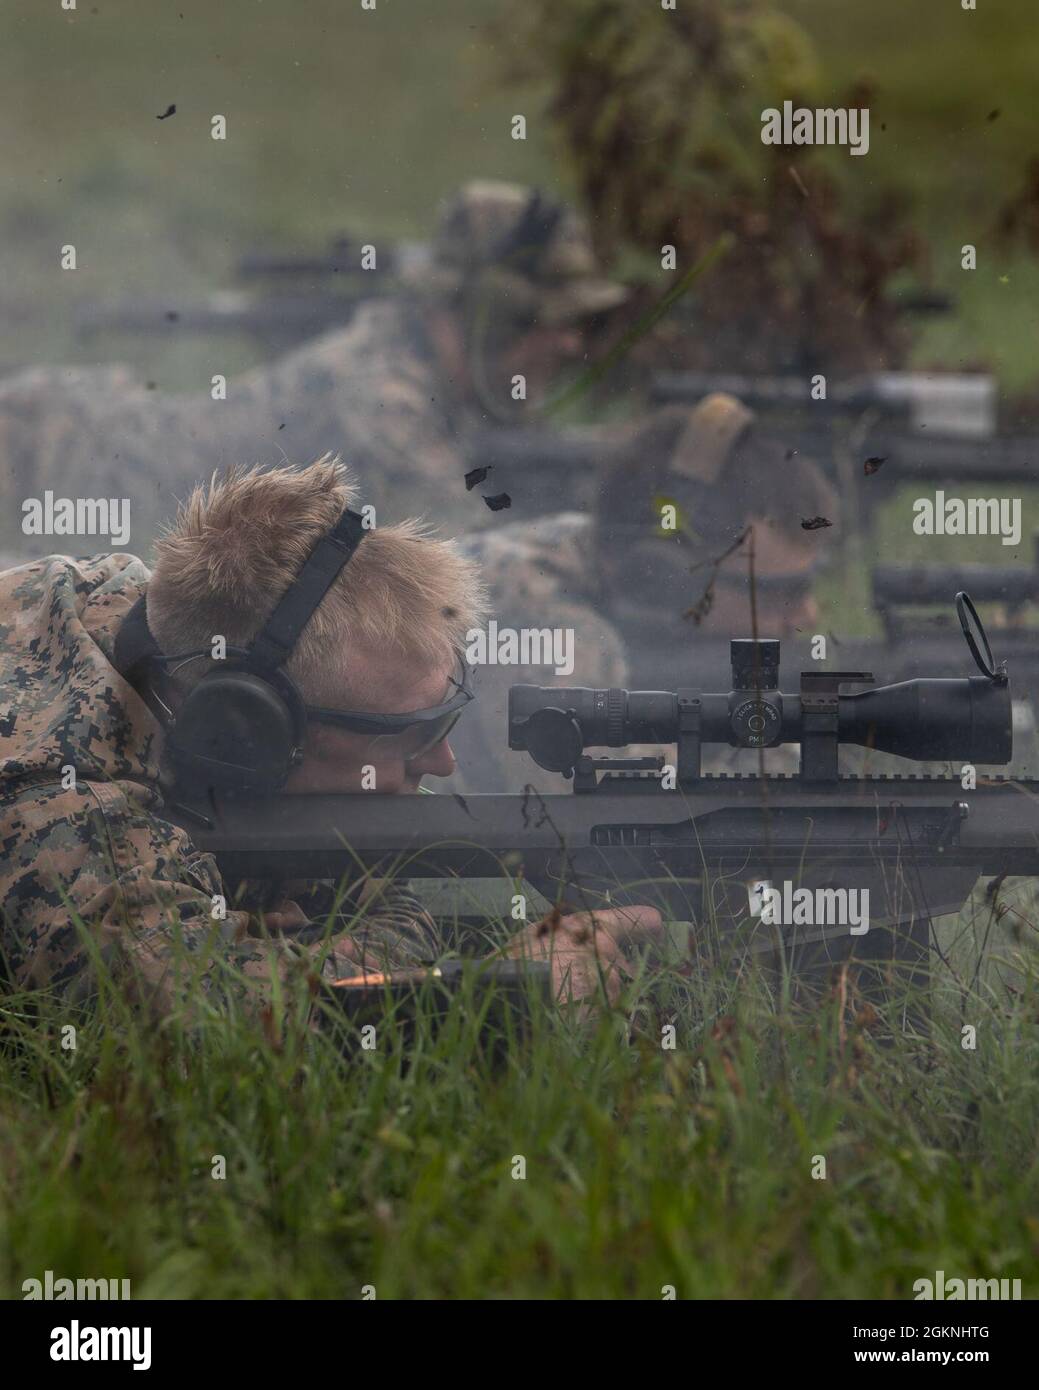 Marines with 3rd Force Reconnaissance Company, 4th Marine Division, fire down range during sniper training at Camp Shelby, Mississippi, on June 6, 2021. The Marines trained with the M107 semi-automatic long-range sniper rifle, an anti-materiel rifle that fires .50 caliber ammunition out to a maximum effective range of 2000 meters. Stock Photo